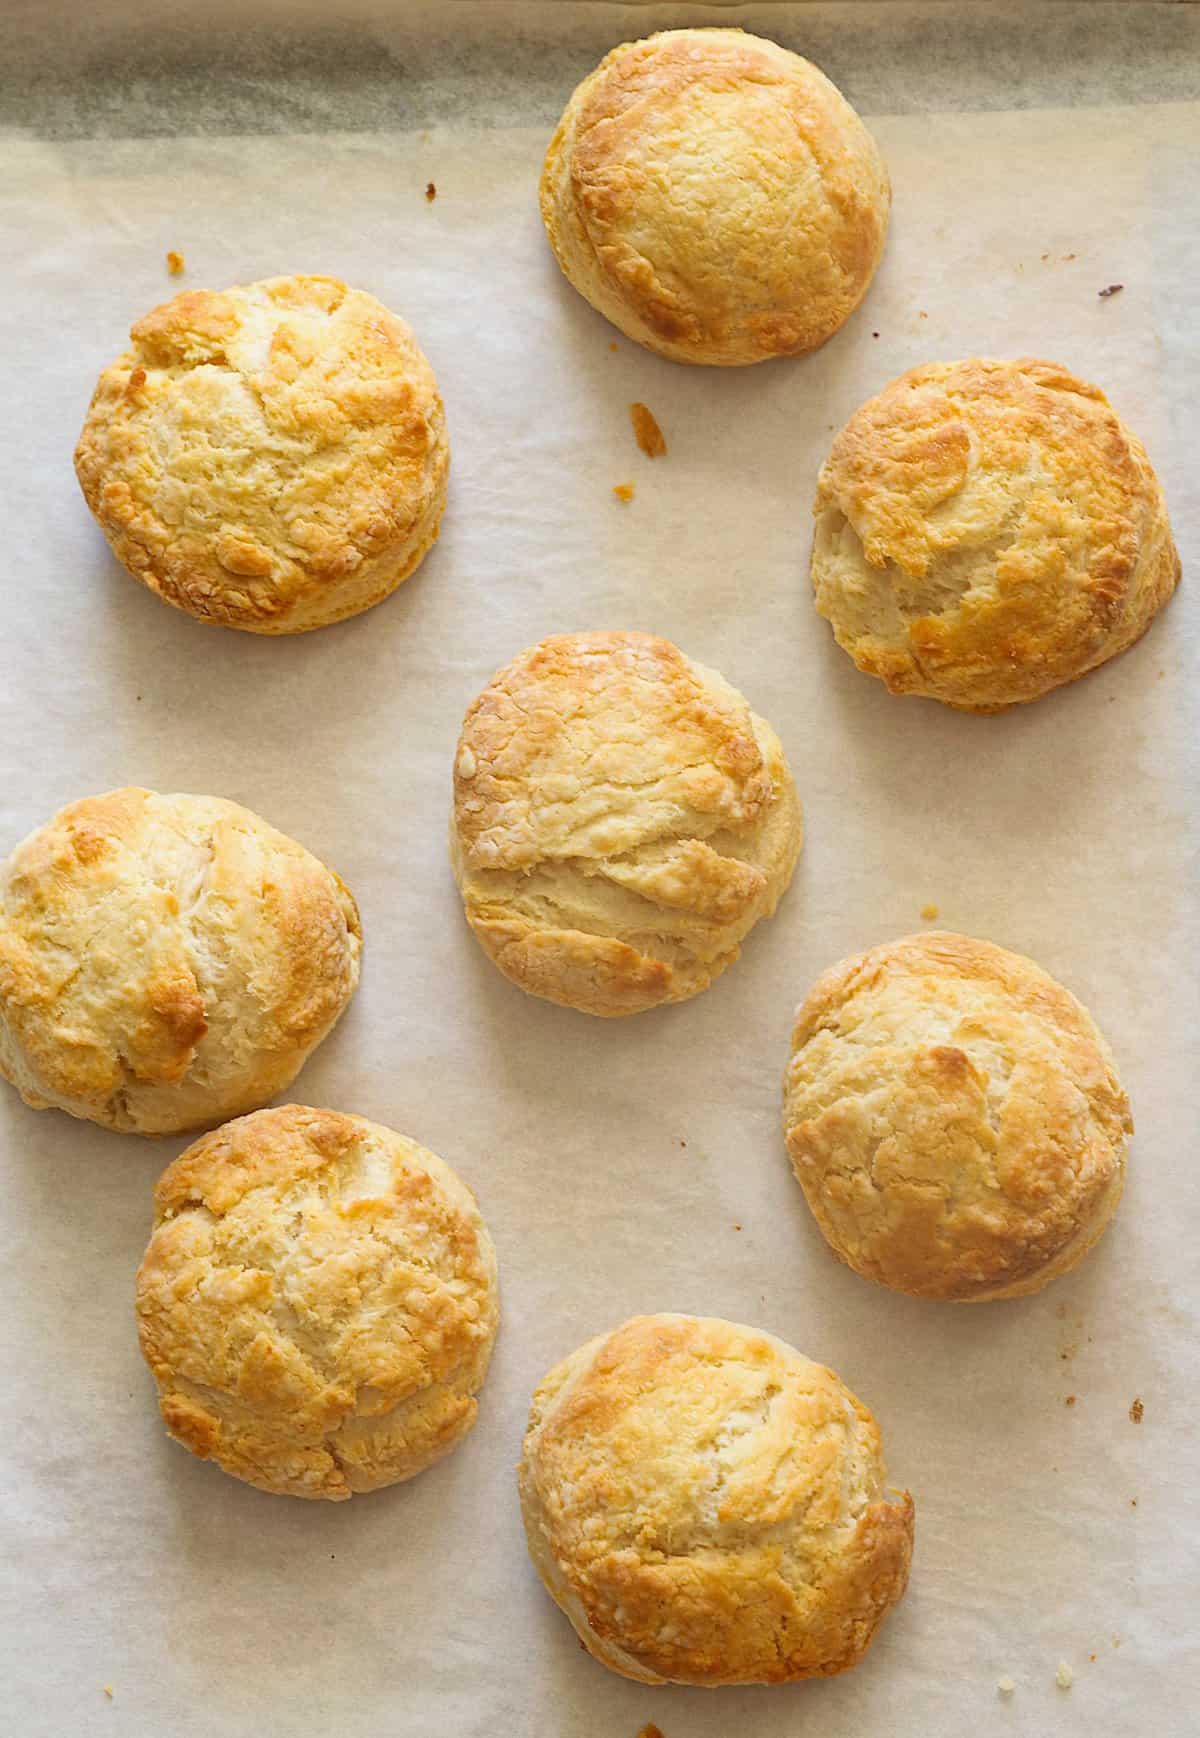 A fresh batch of Honey Butter Biscuits fresh from the oven